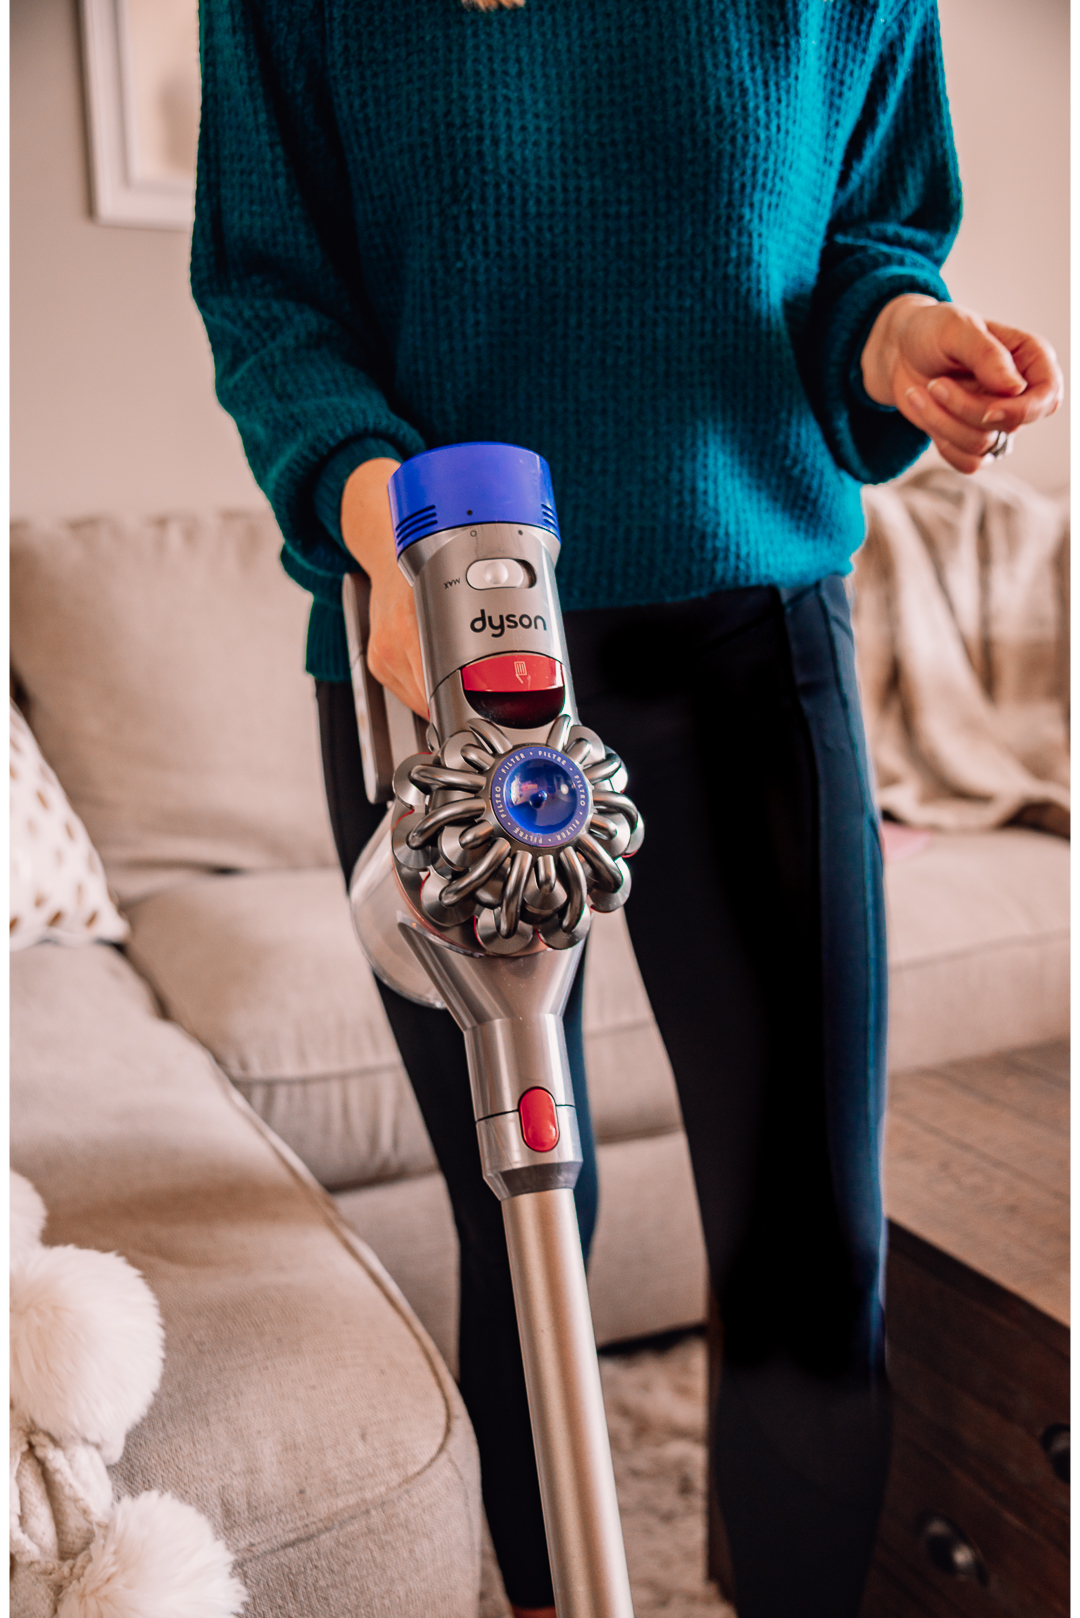 dyson hand vacuum cleaner